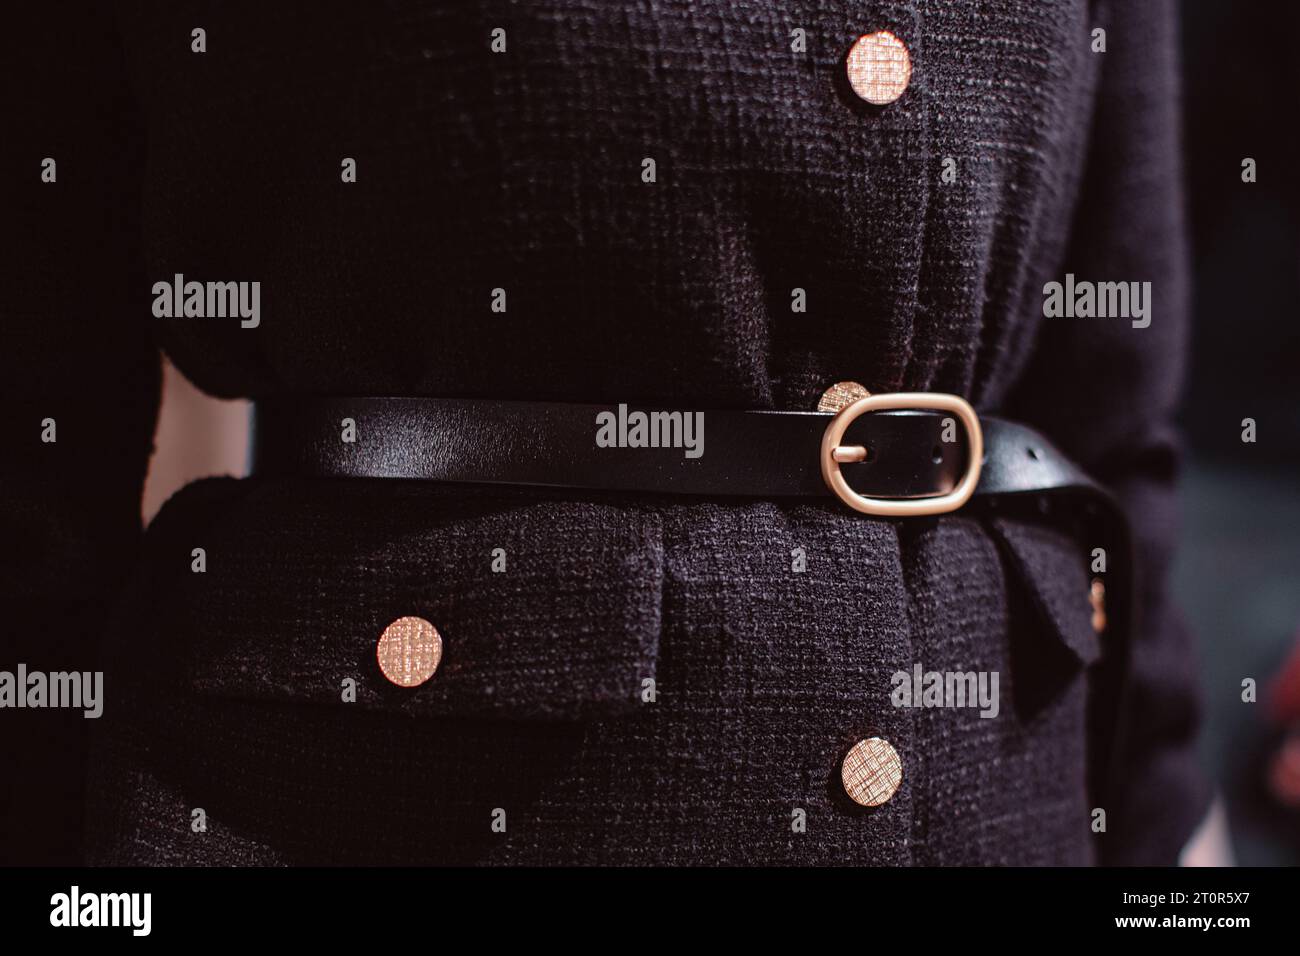 Fashion details of a classy black jacket, leather belt and golden buttons. Stock Photo